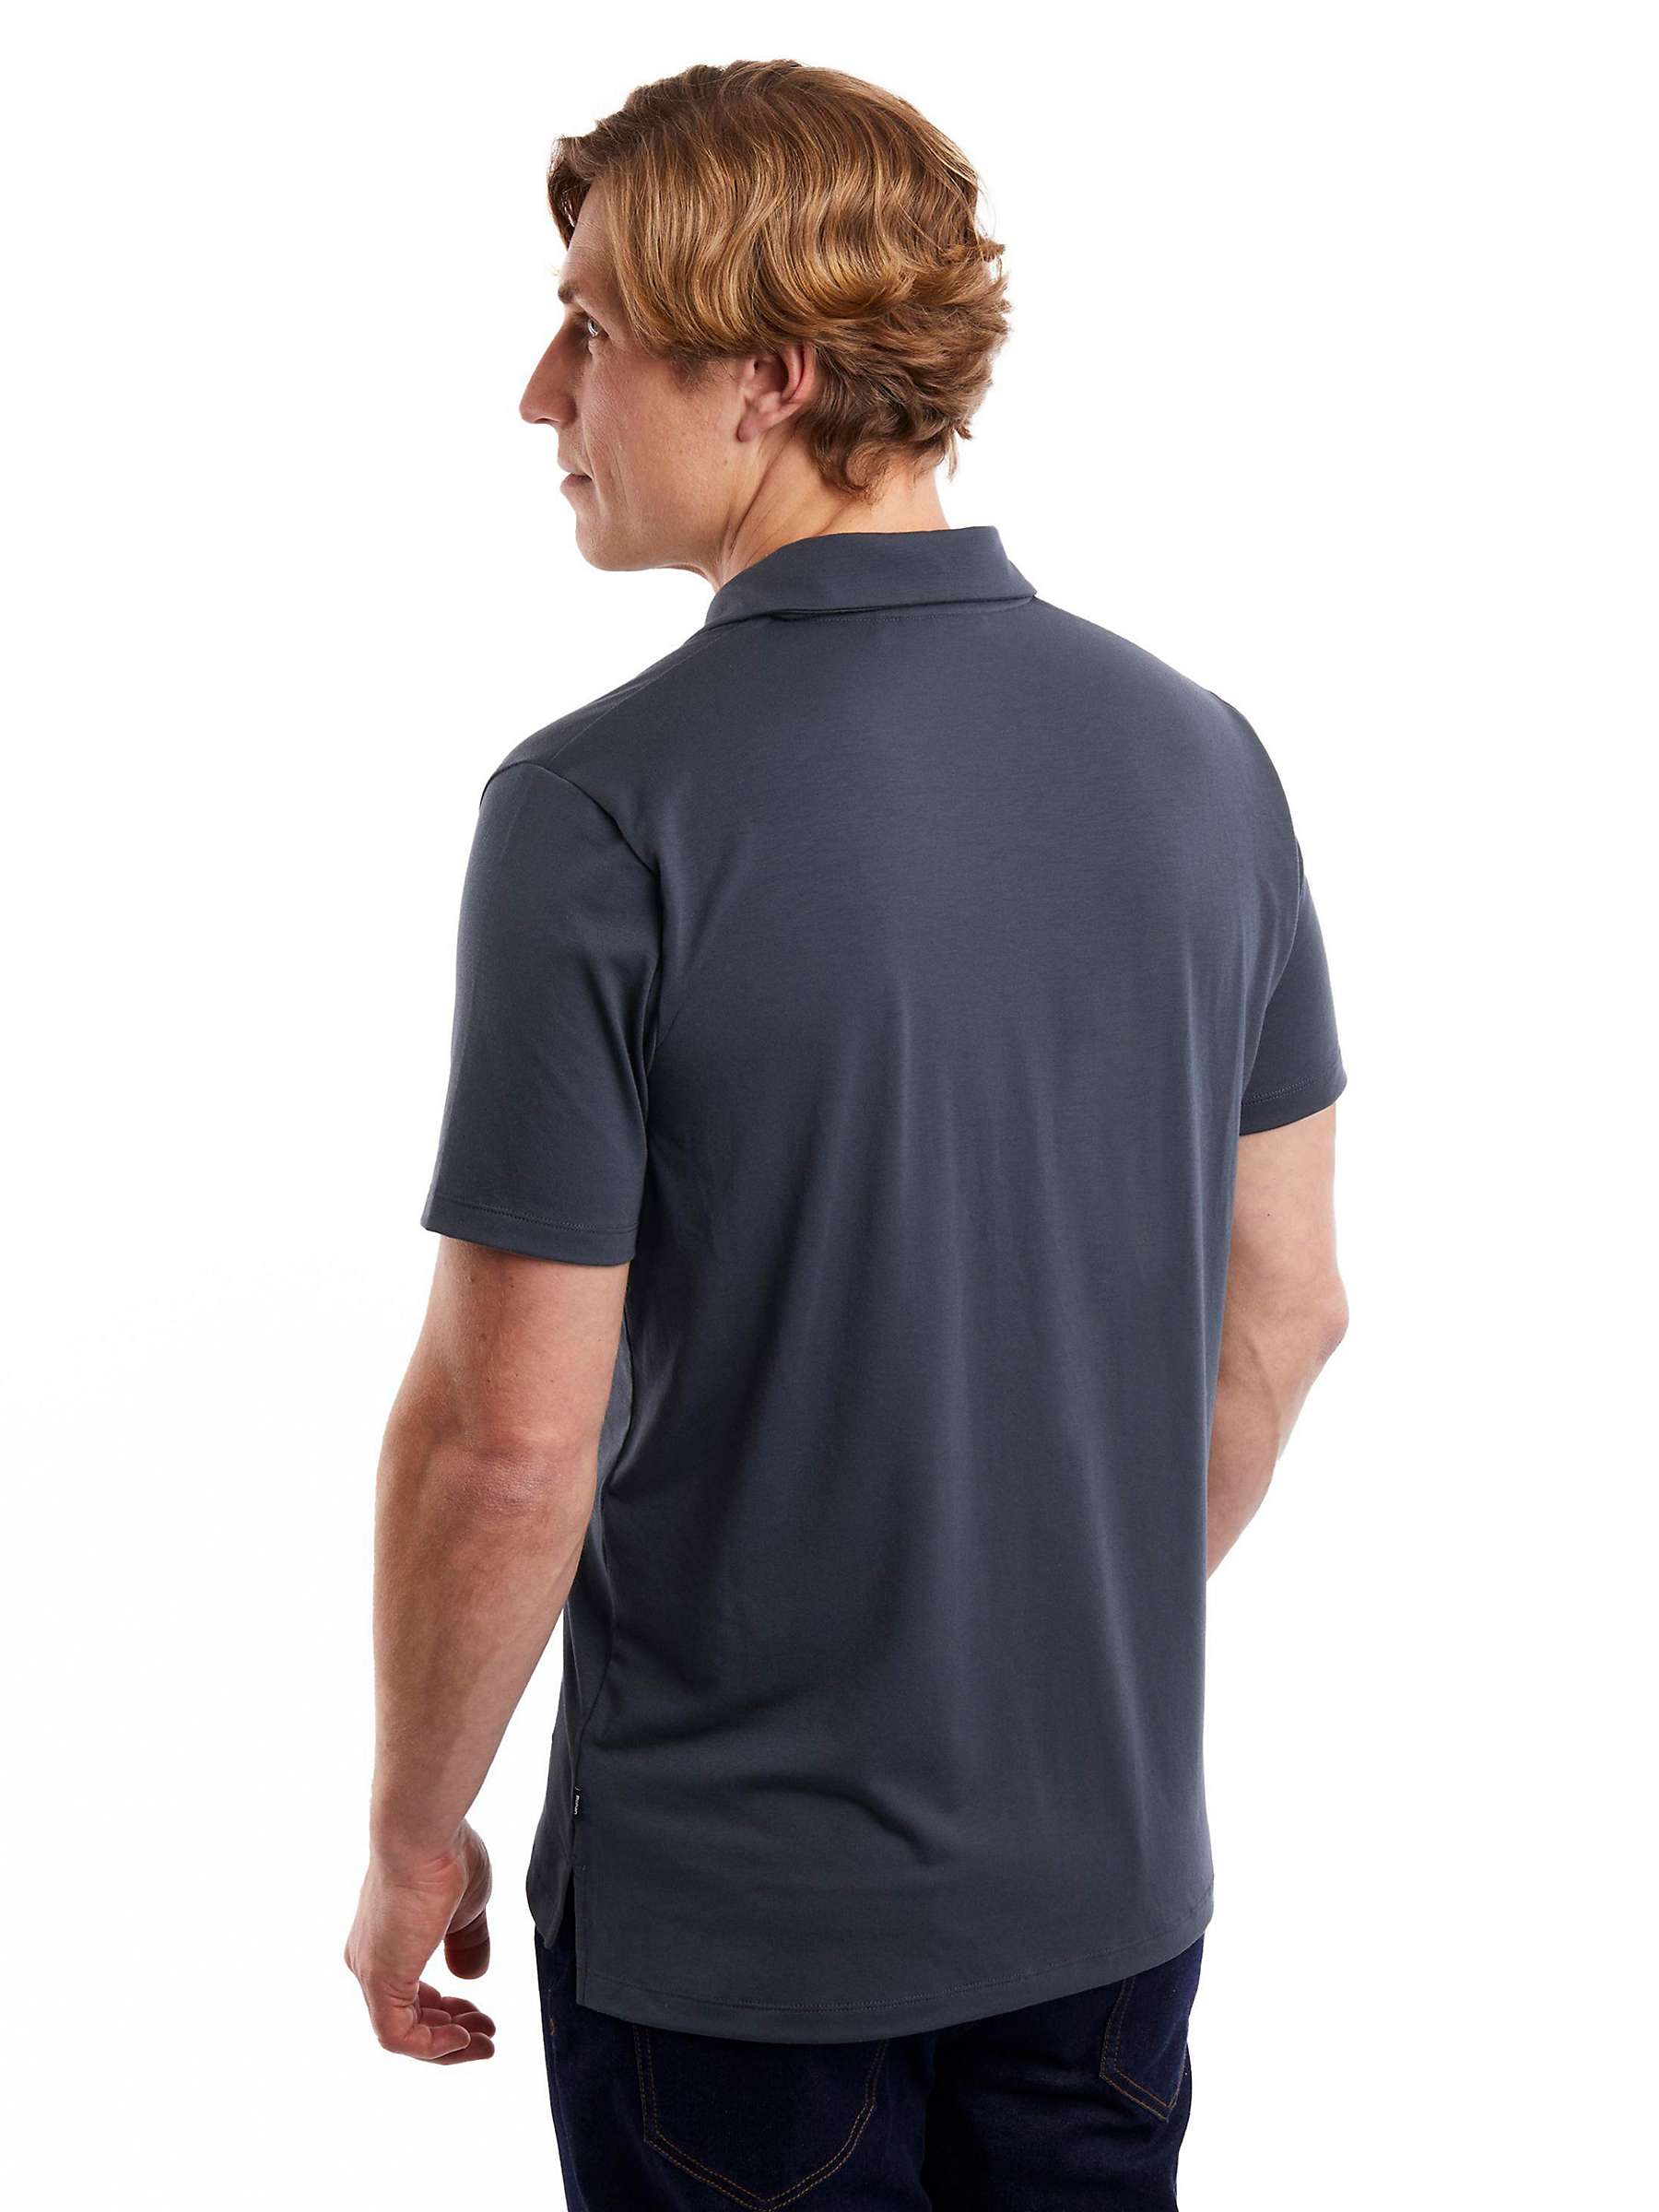 Buy Rohan Global Short Sleeve Polo Top Online at johnlewis.com